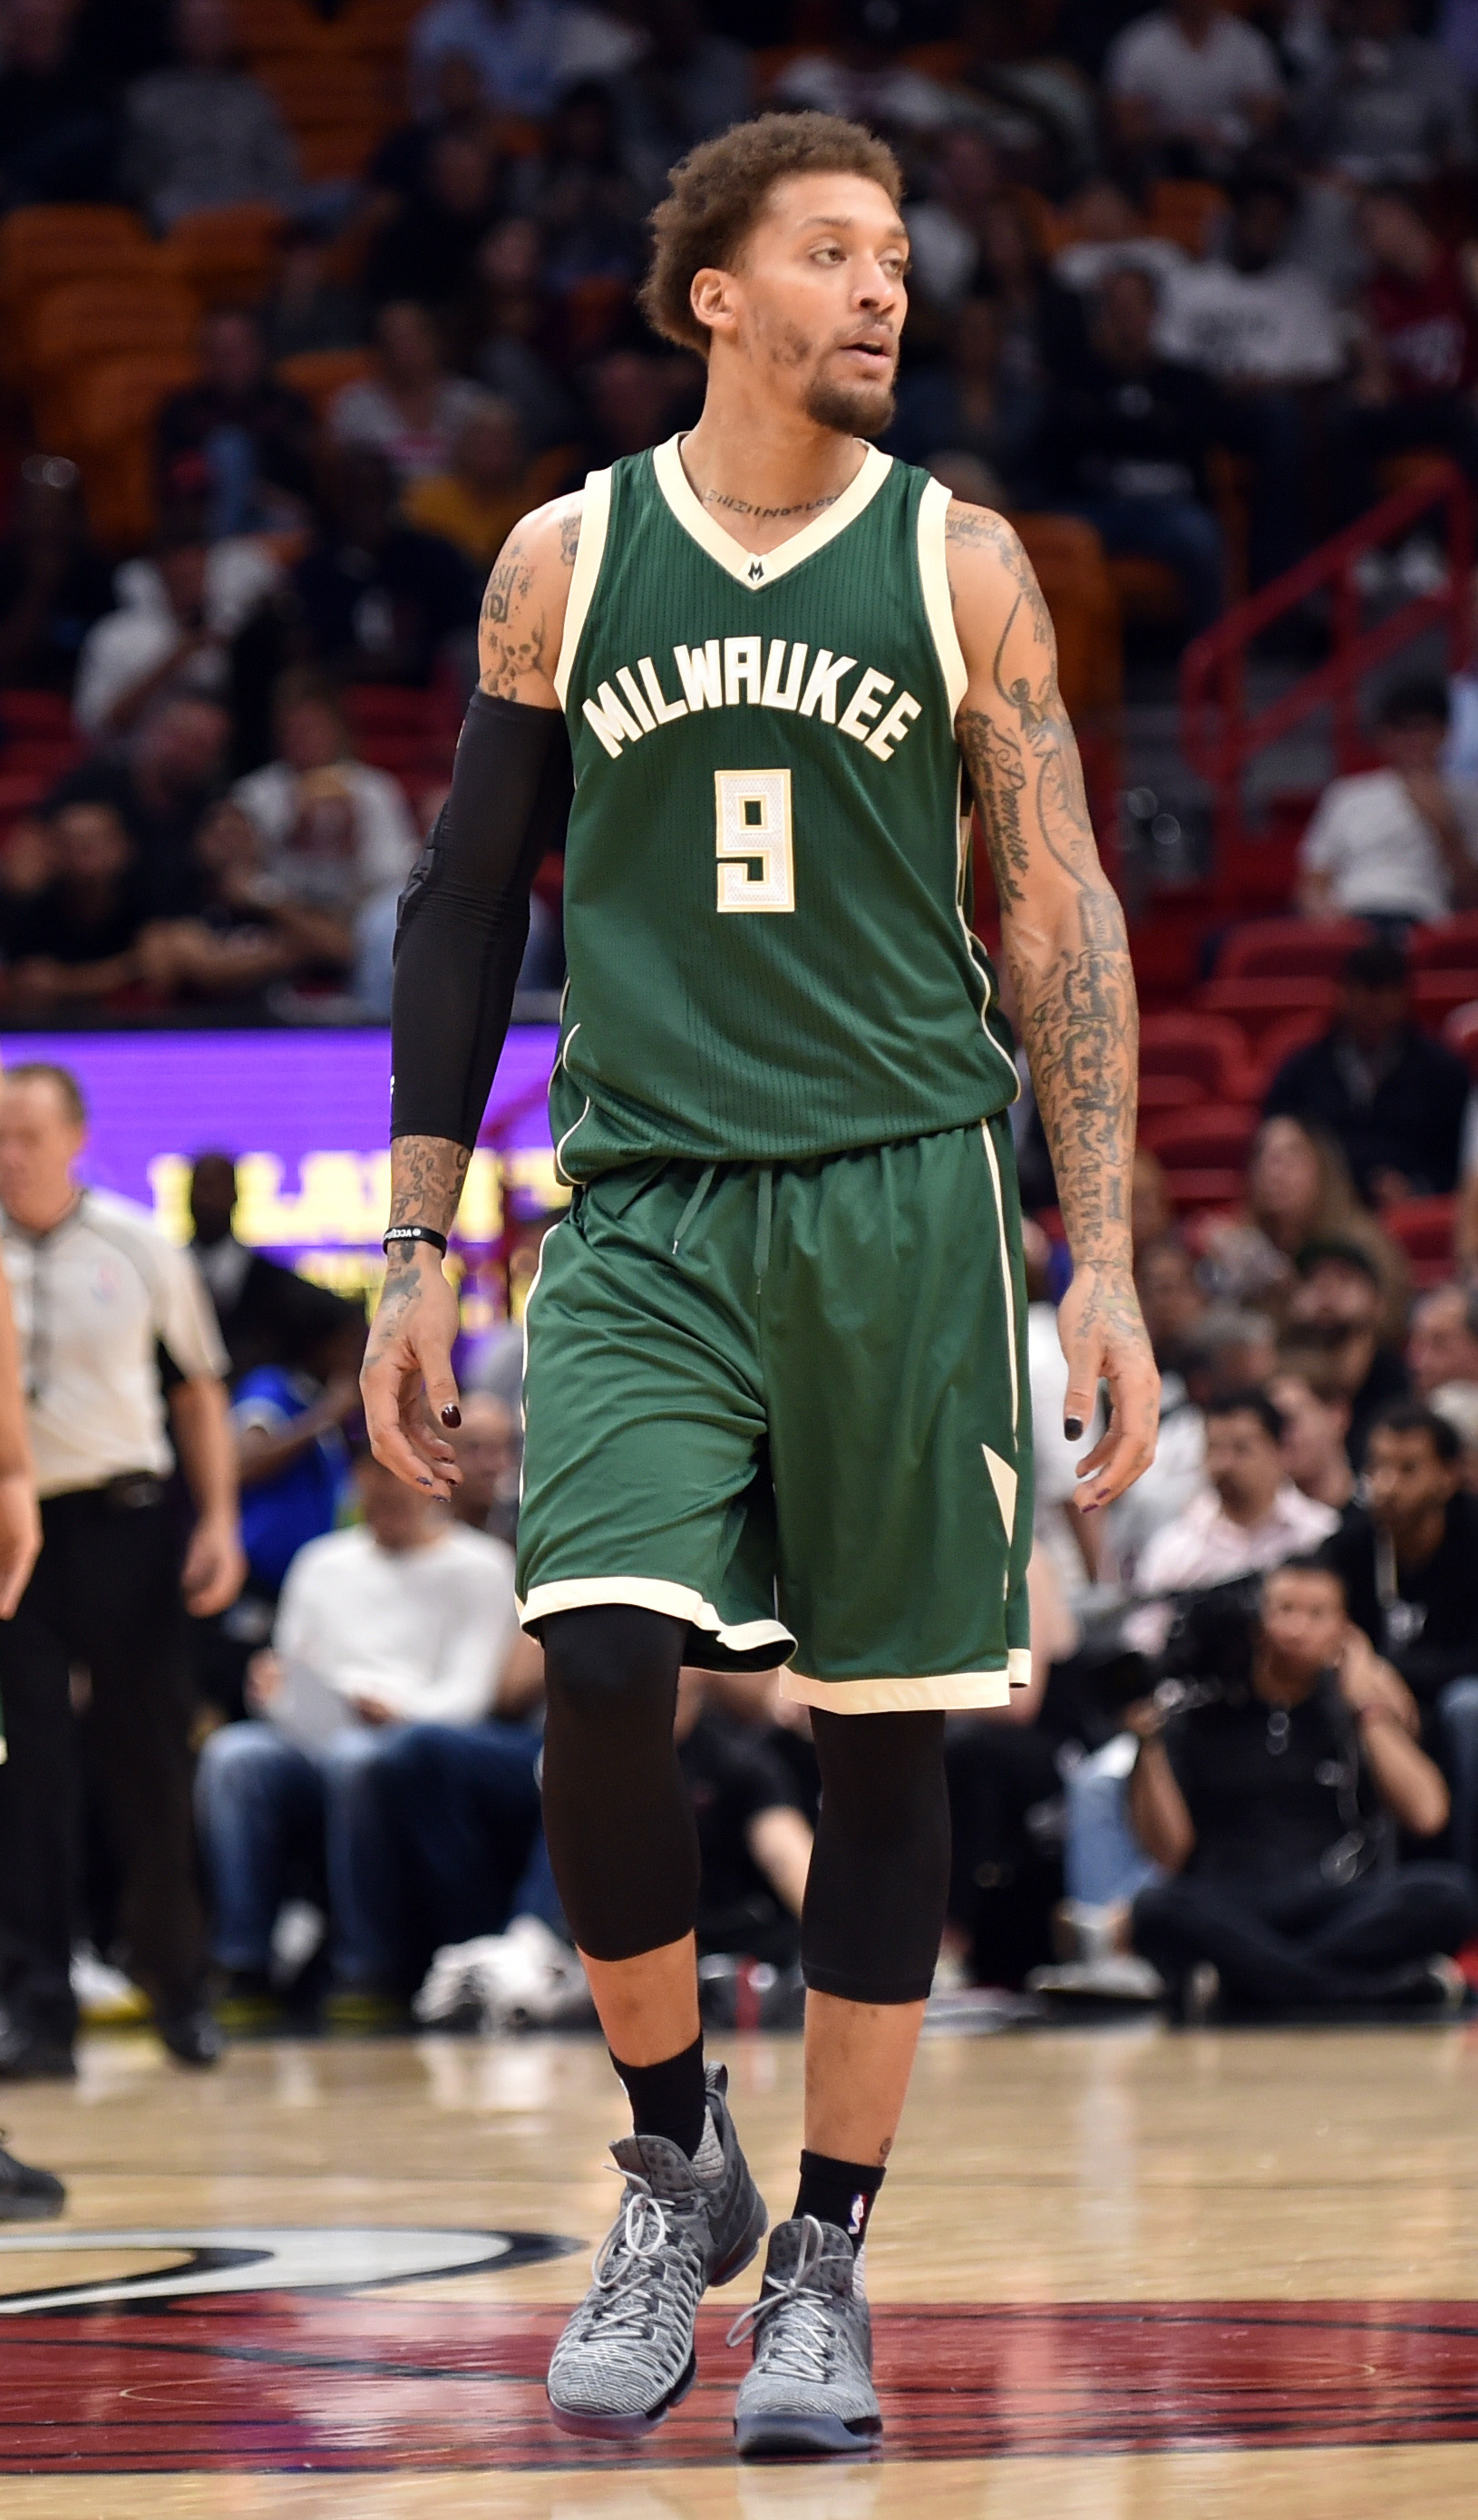 Will Michael Beasley Make the 2014-2015 Miami Heat Roster?